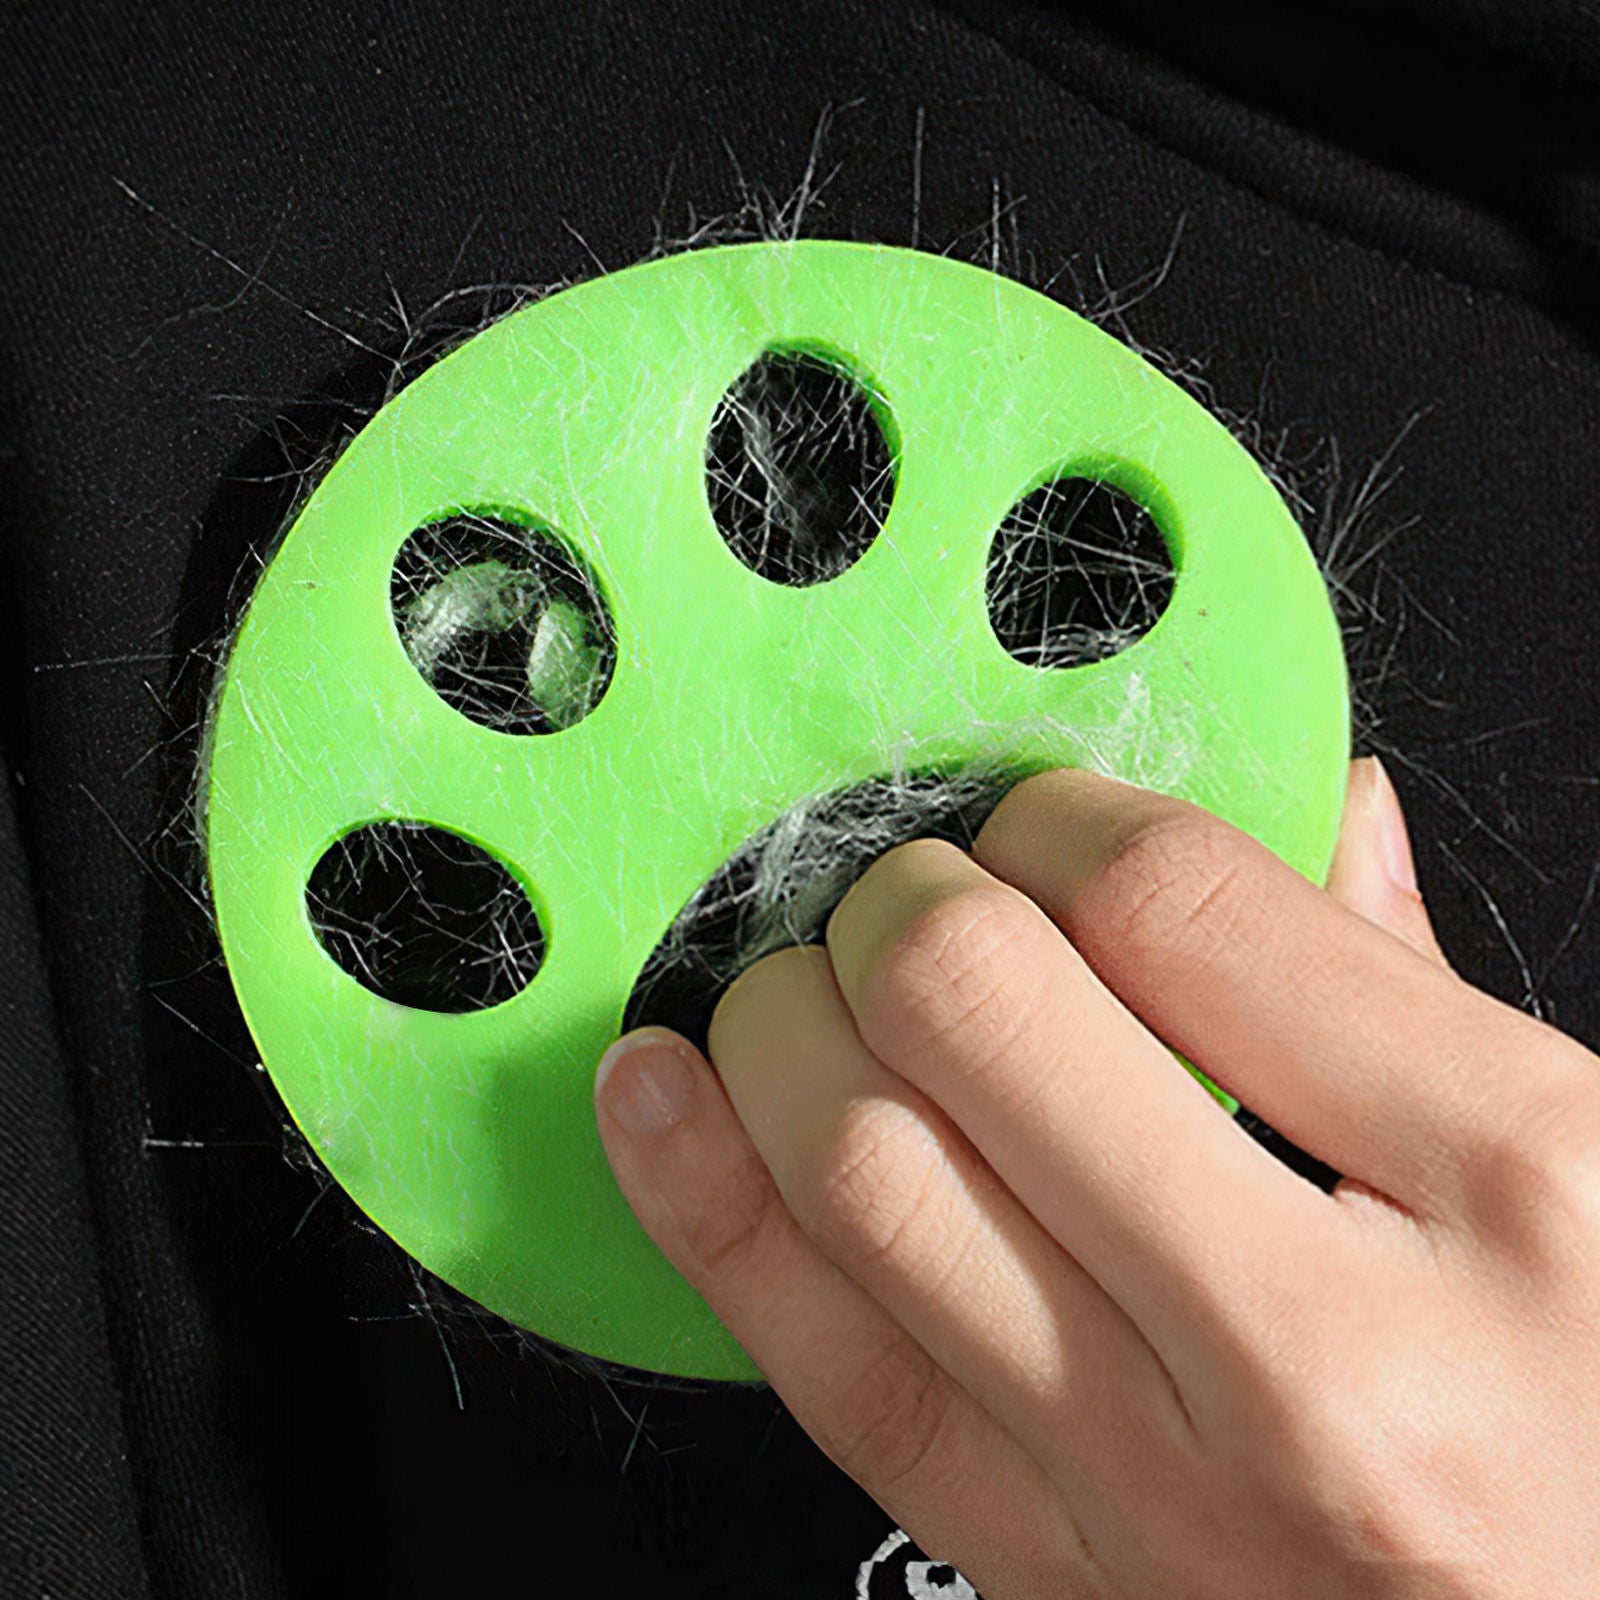 Pawfriends Soft Pet Hair Remover Clothes Cleaning Lint Catcher Solid Laundry Ball Green - SILBERSHELL